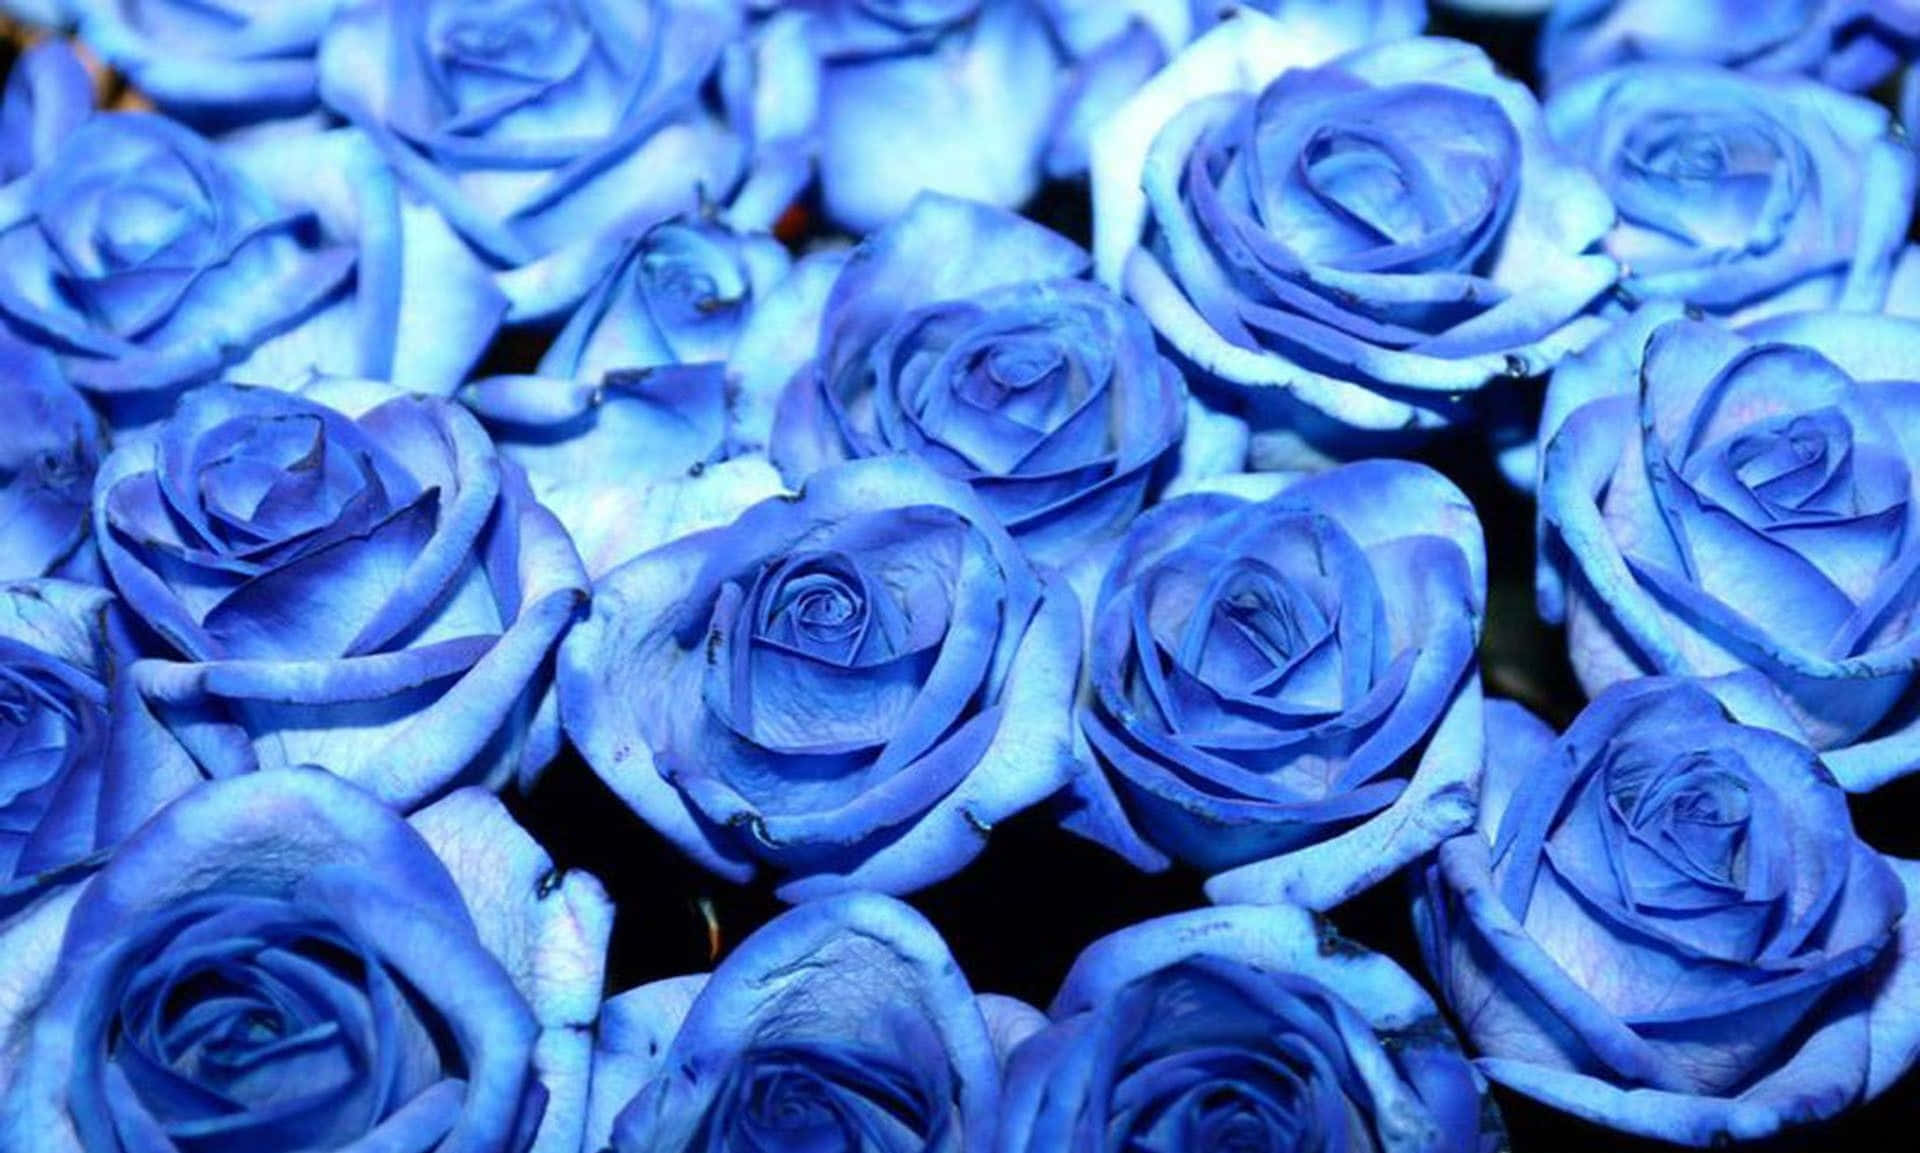 Free Blue Rose Wallpaper Downloads, [100+] Blue Rose Wallpapers for FREE |  